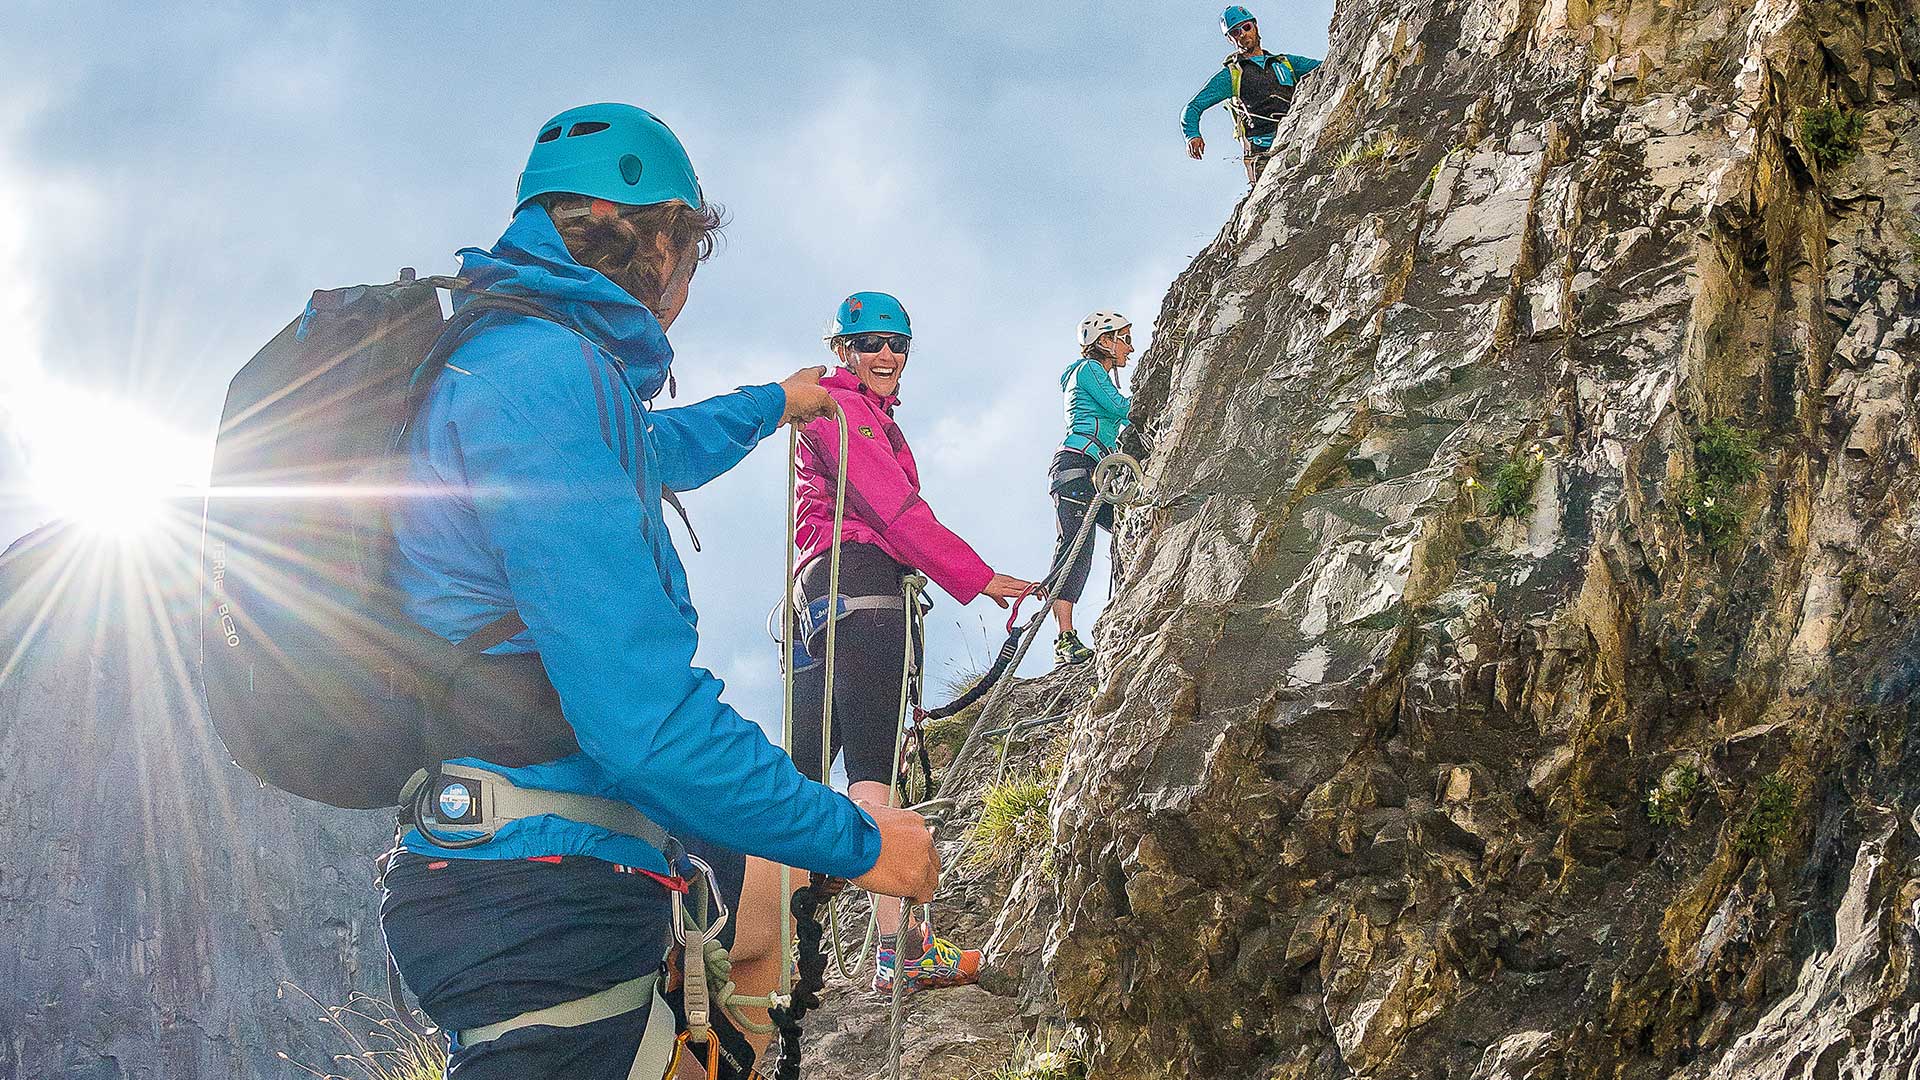 Via Ferrata is a great way to climb in the Alps